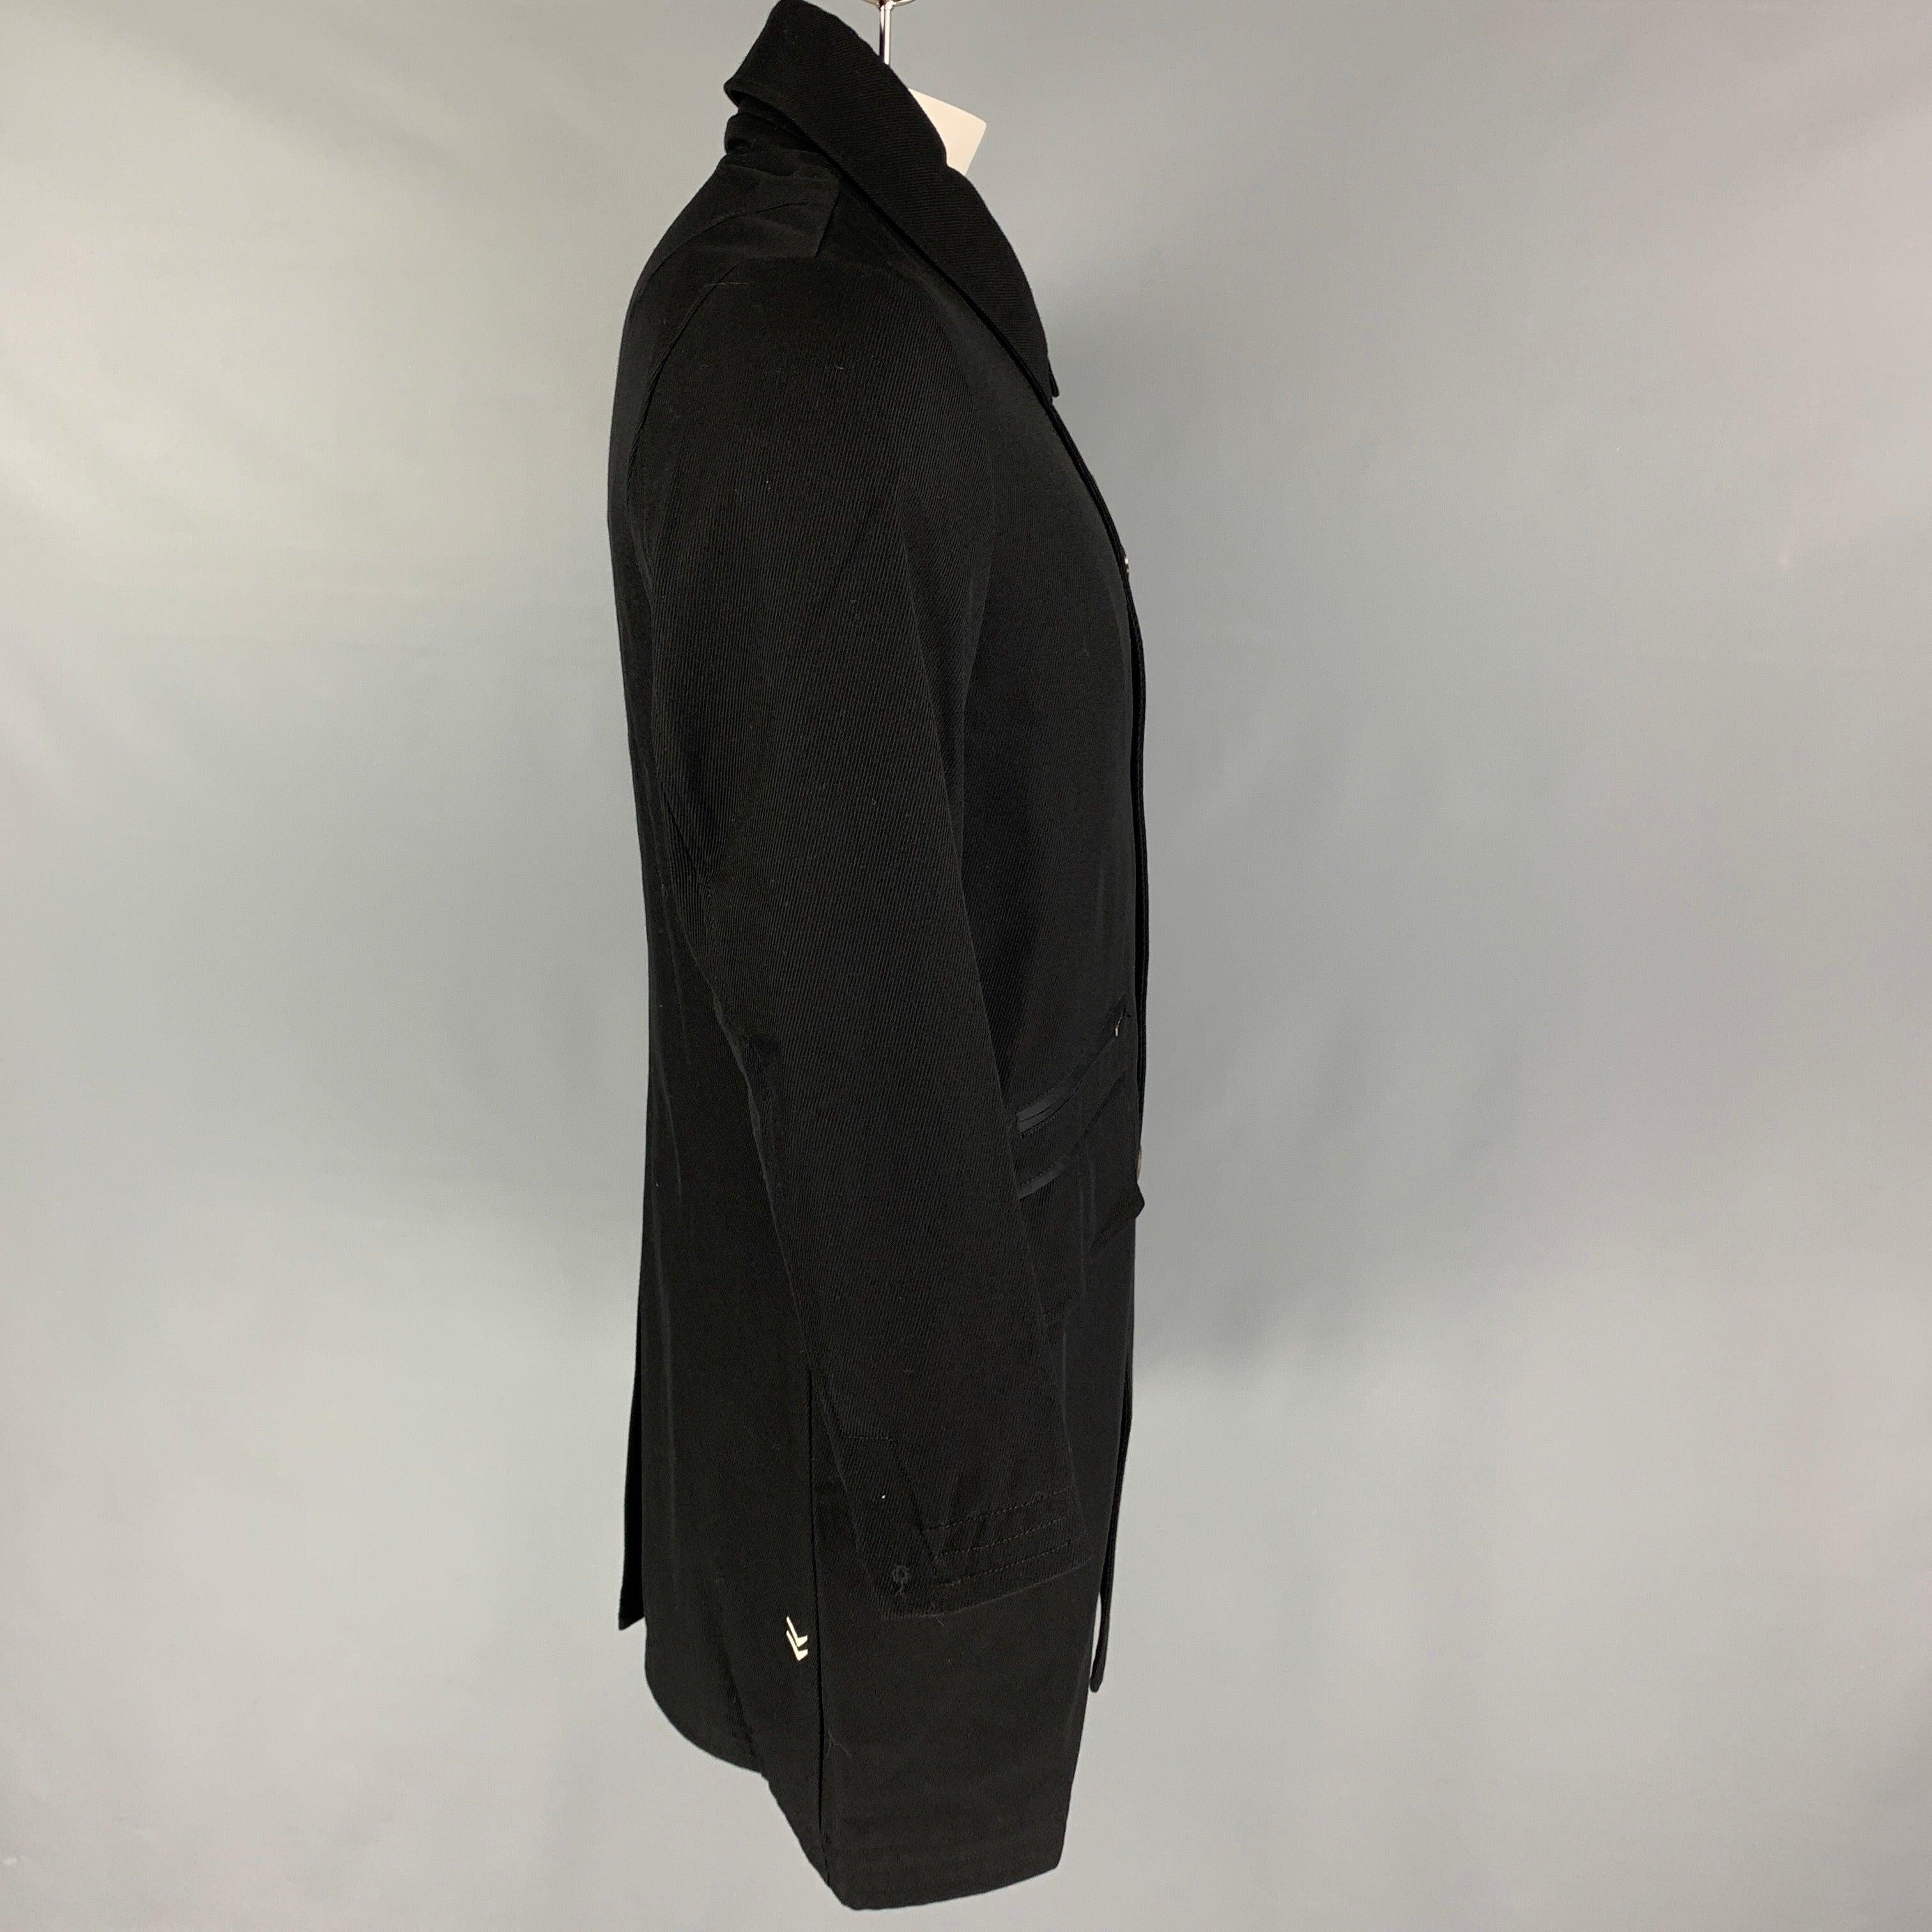 JOHN VARVATOS x CONVERSE coat comes in a black lana wool slap pockets, single back vent, ribbed collar, spread collar, and a buttoned closure.
Excellent
Pre-Owned Condition.  

Marked:   Size tag removed.  

Measurements: 
 
Shoulder: 17.5 inches